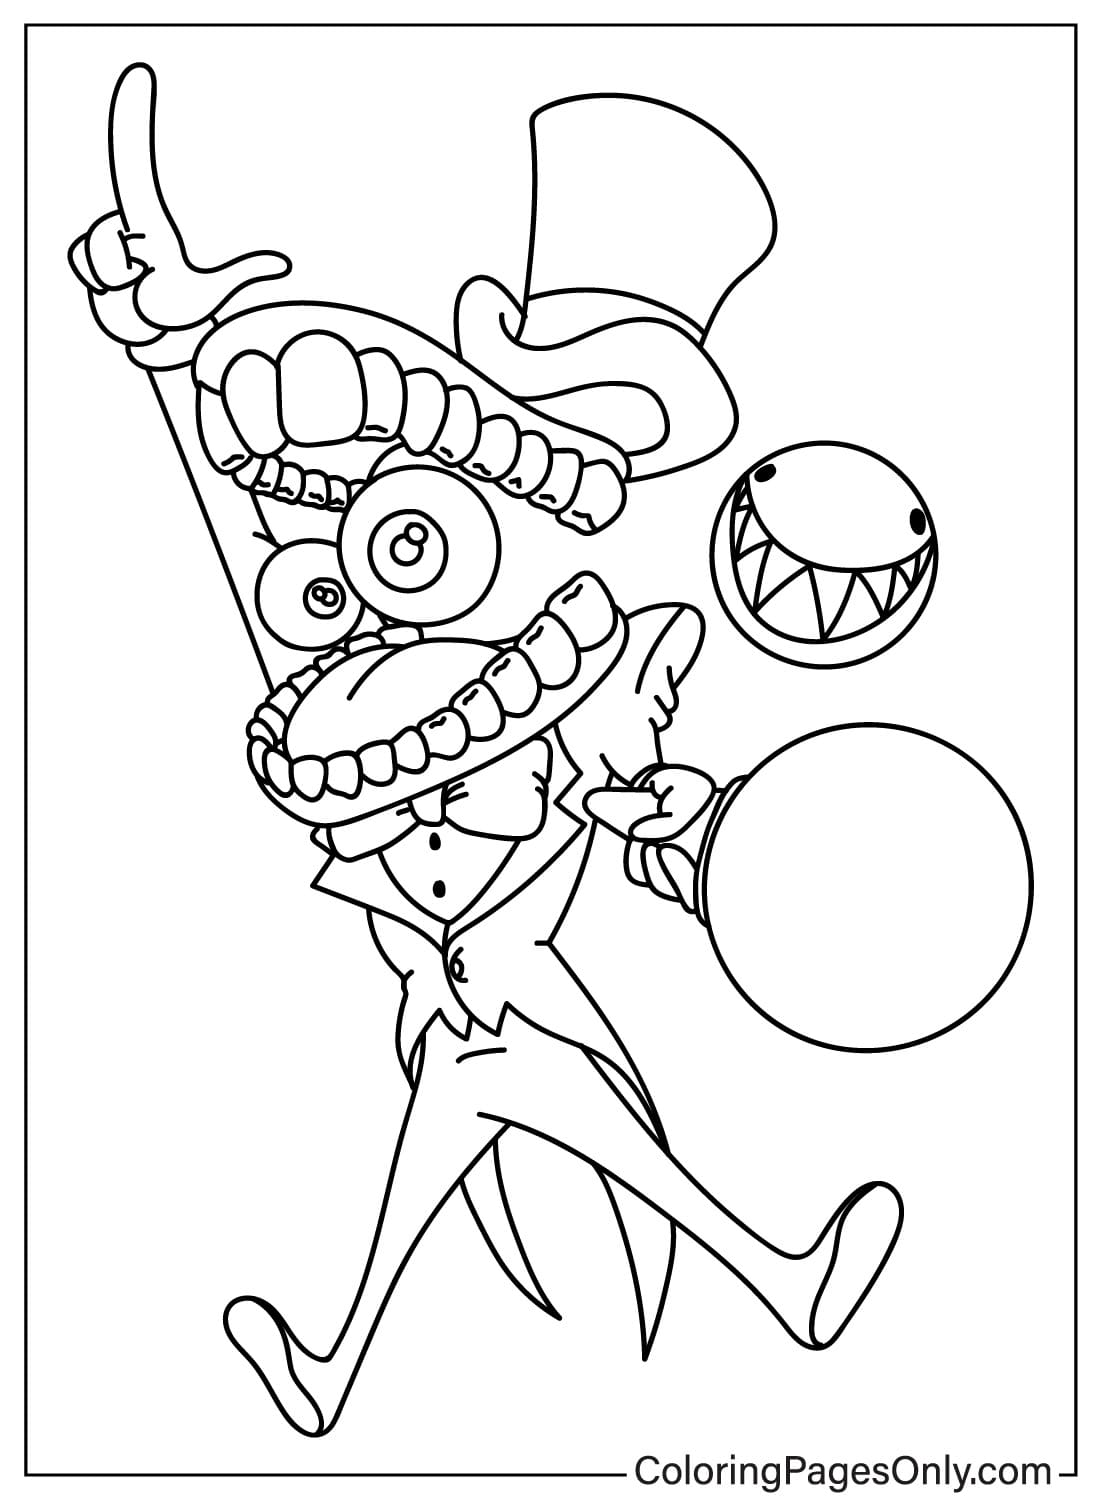 Caine Coloring Pages to Printable from The Amazing Digital Circus